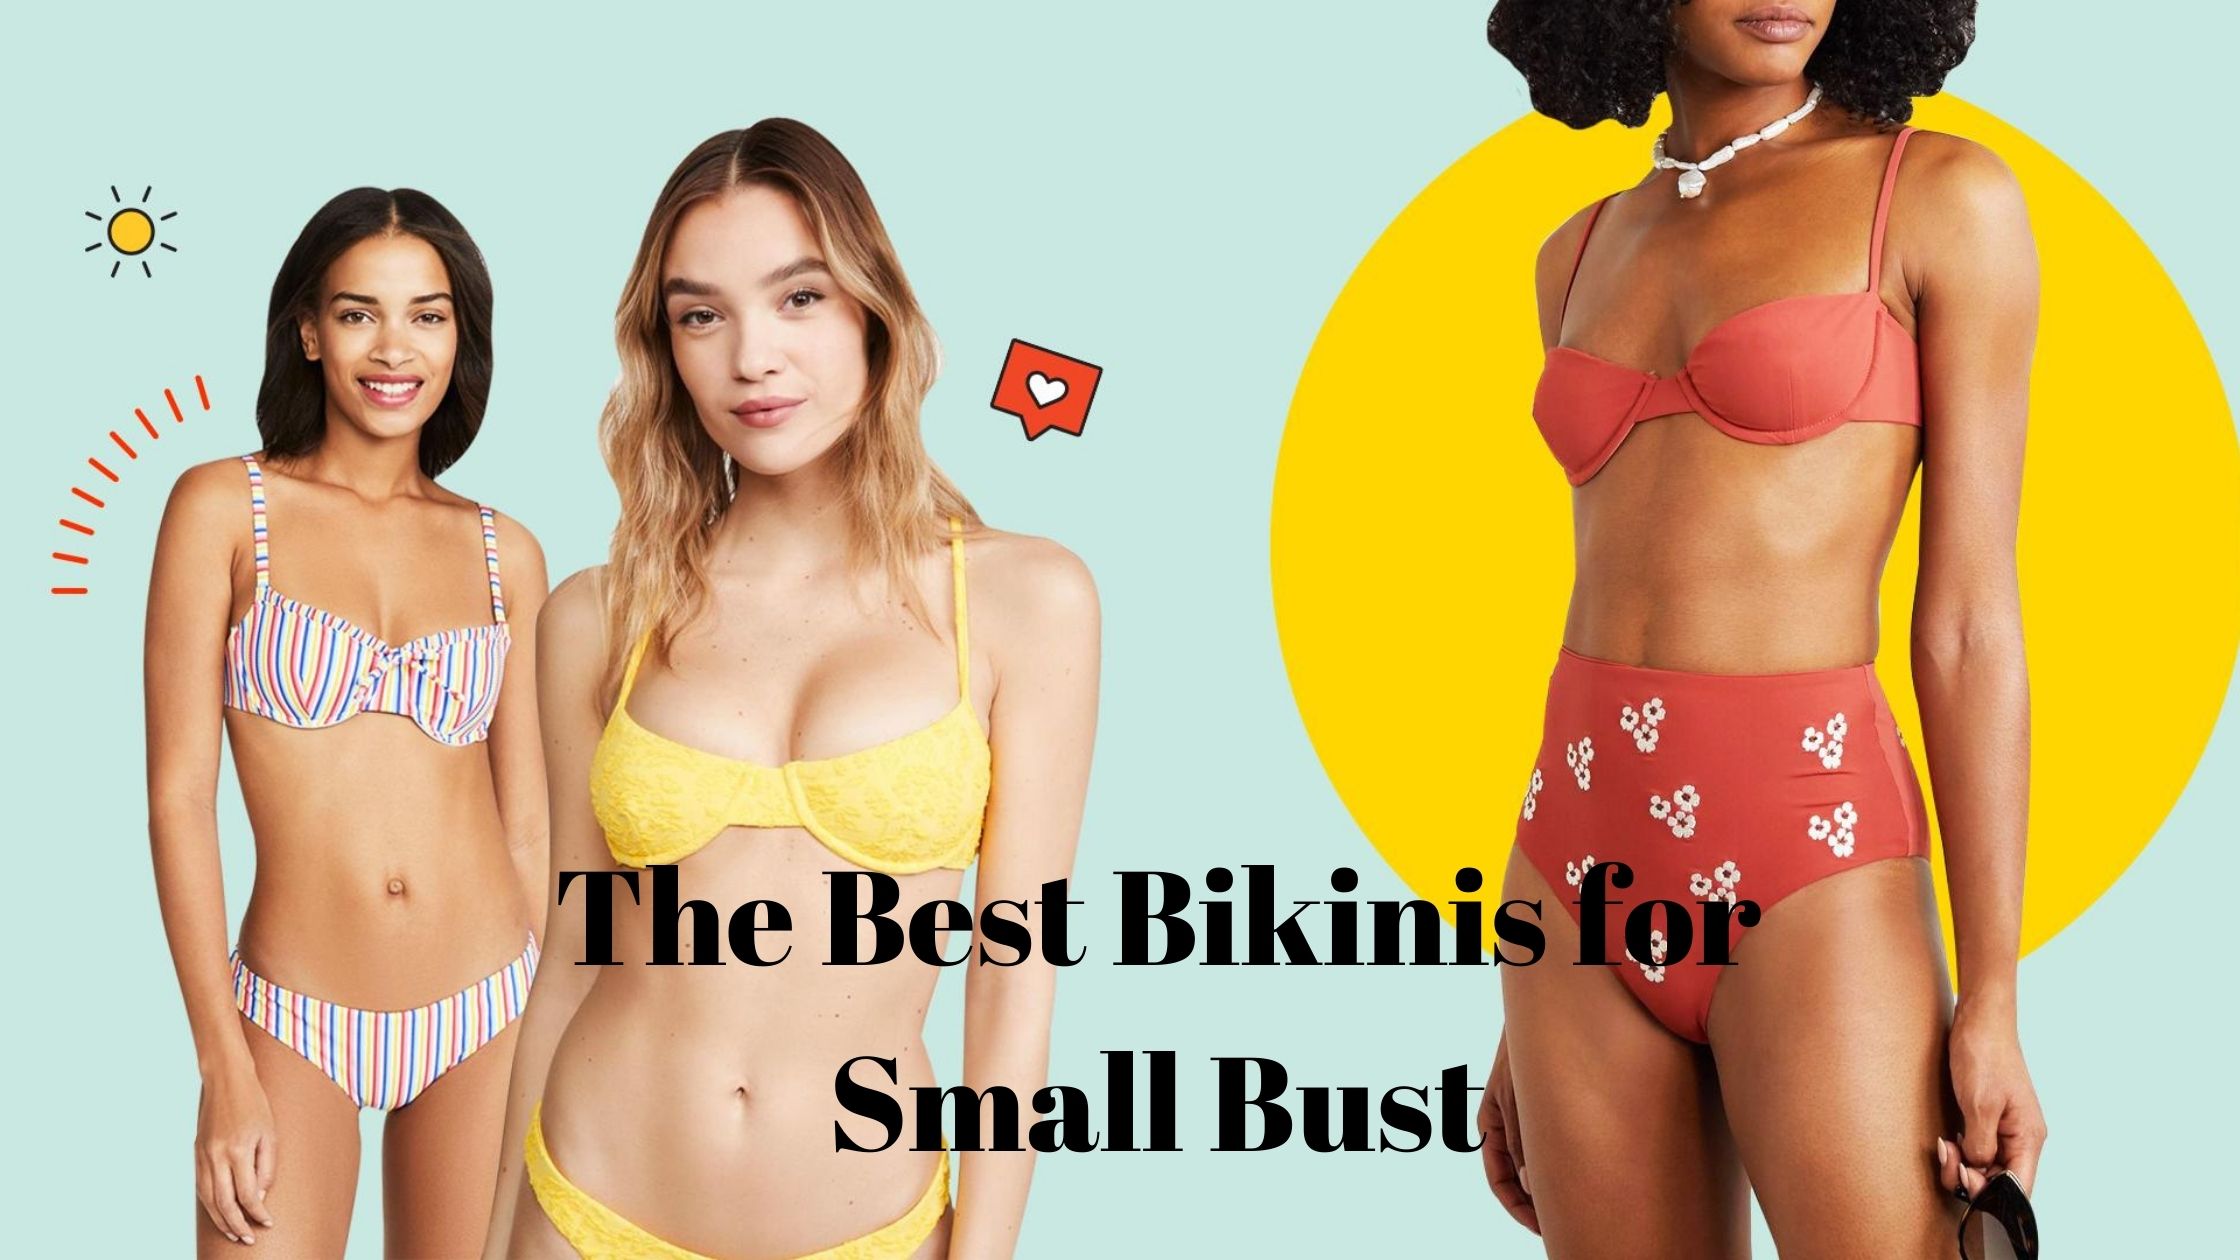 You are currently viewing The Best Bikinis for Small Bust